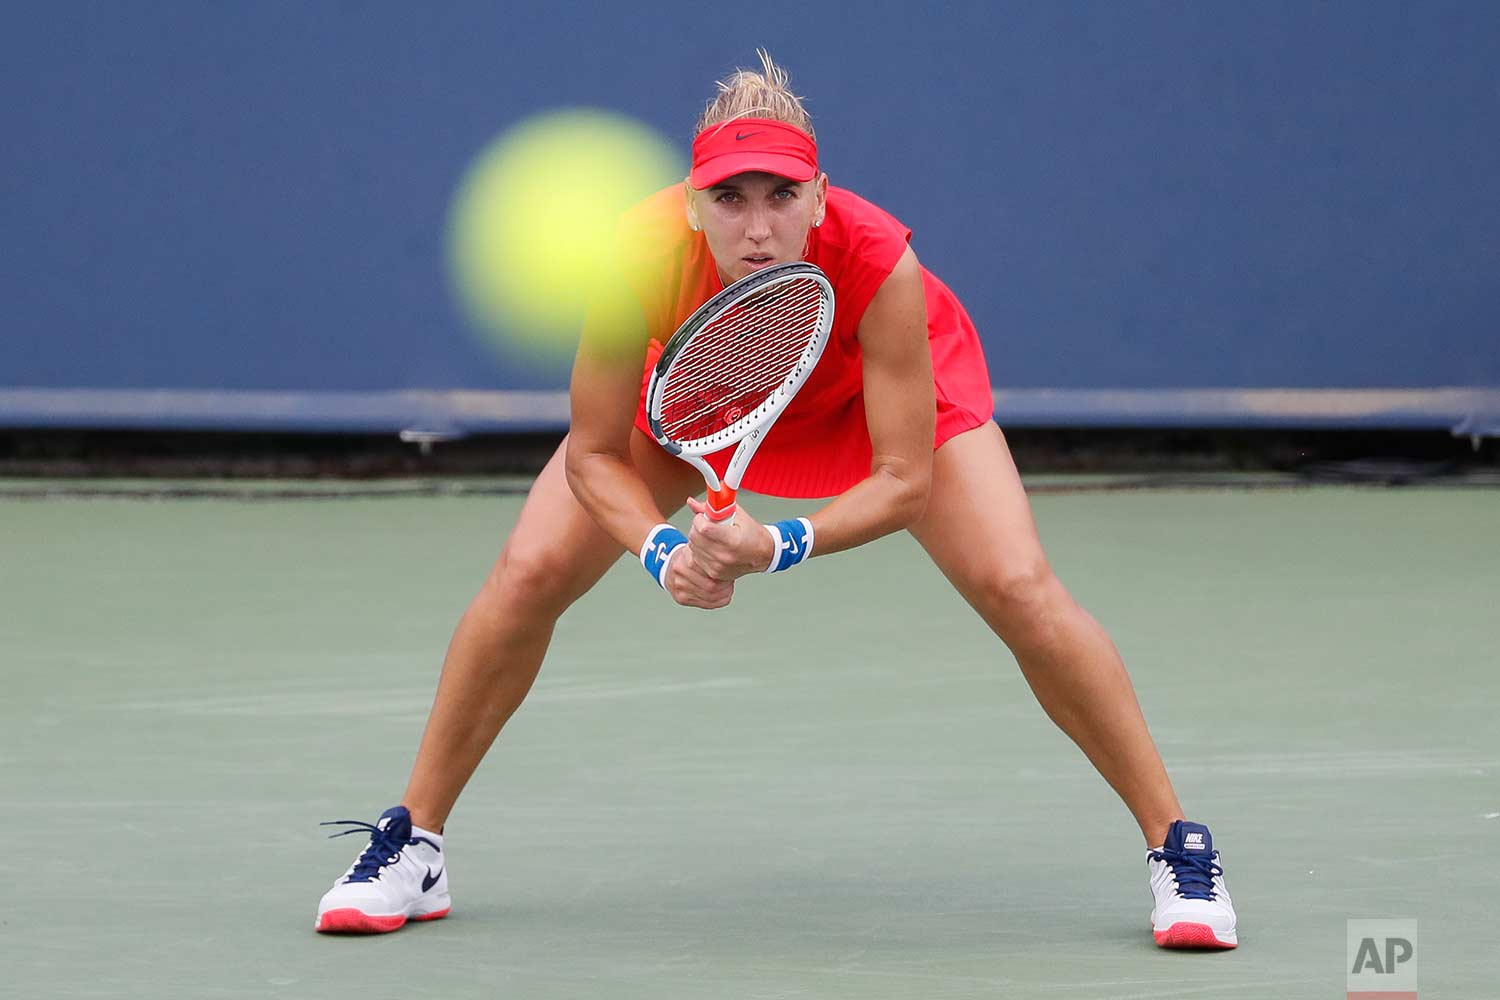  Elena Vesnina, of Russia, waits for a serve from Caroline Wozniacki, of Denmark, during the middle rounds at the Western & Southern Open tennis tournament, Wednesday, Aug. 16, 2017, in Mason, Ohio. (AP Photo/John Minchillo) 